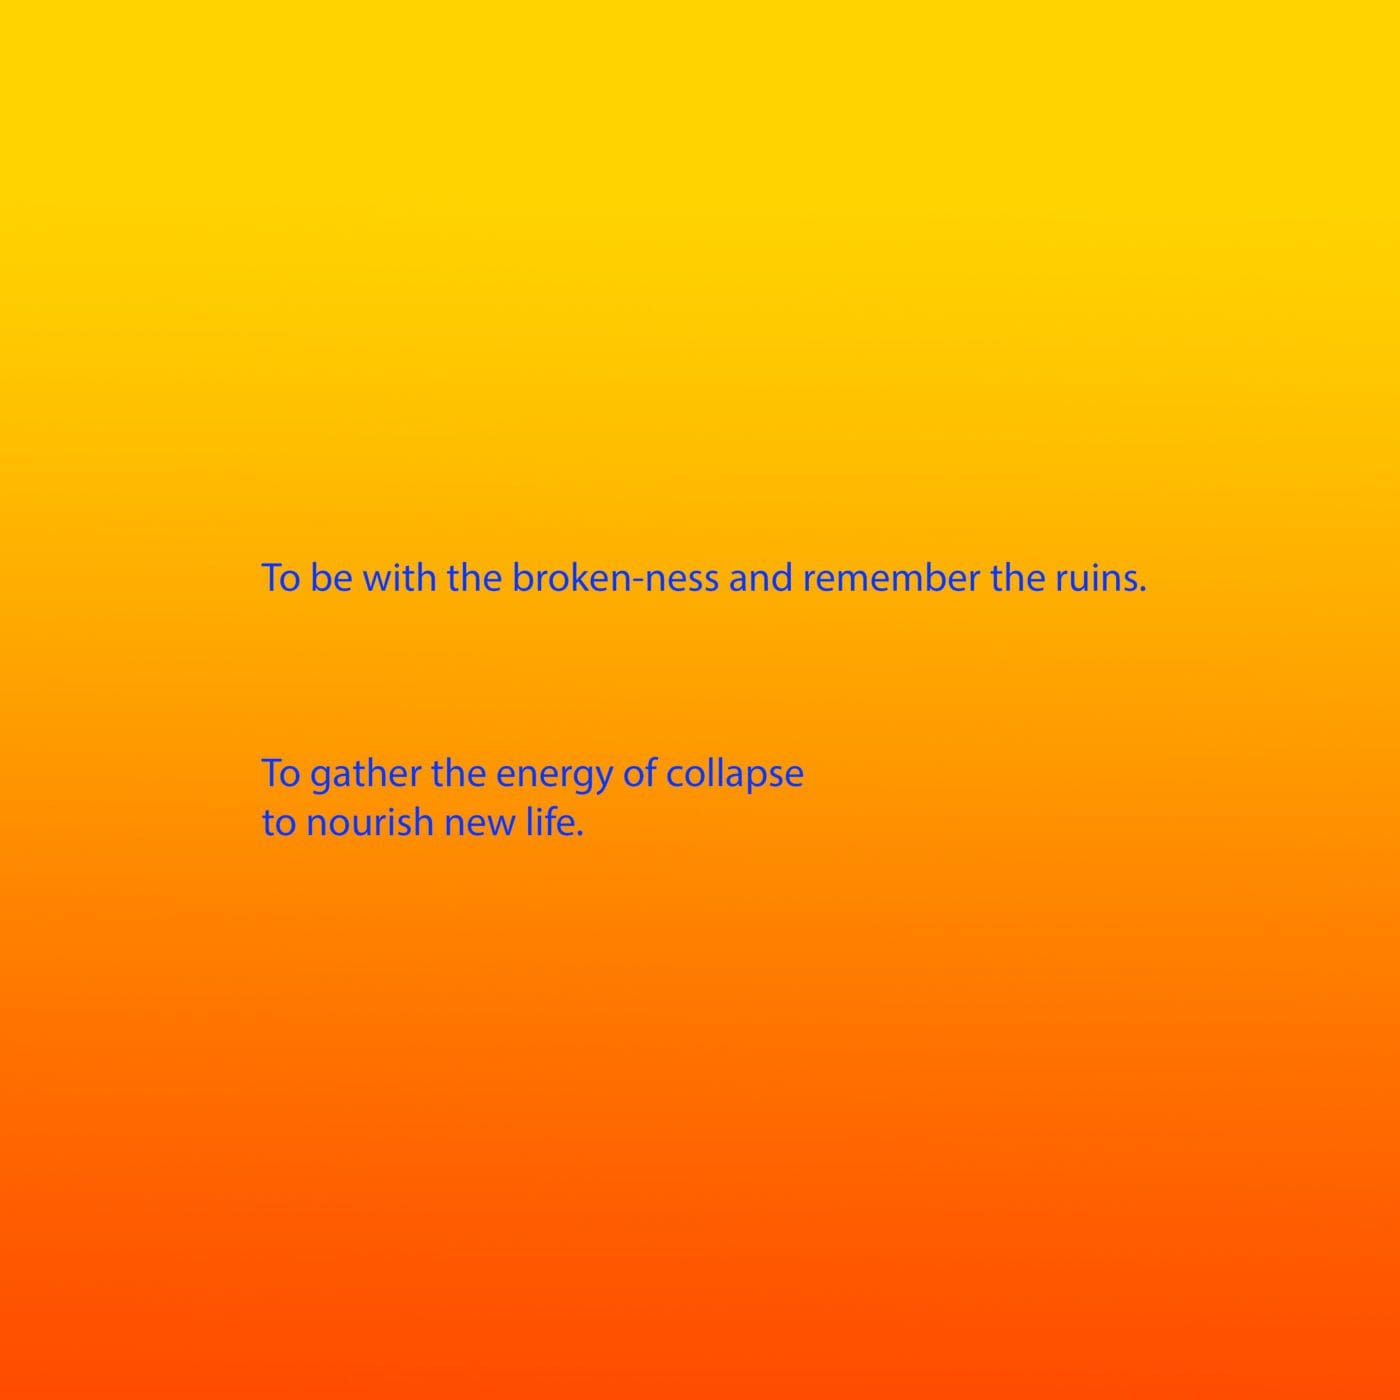 Bright blue text appears on a background that is a gradient from yellow, through orange to red. The text reads: To be with the broken-ness and remember the ruins. To gather the energy of collapse to nourish new life.